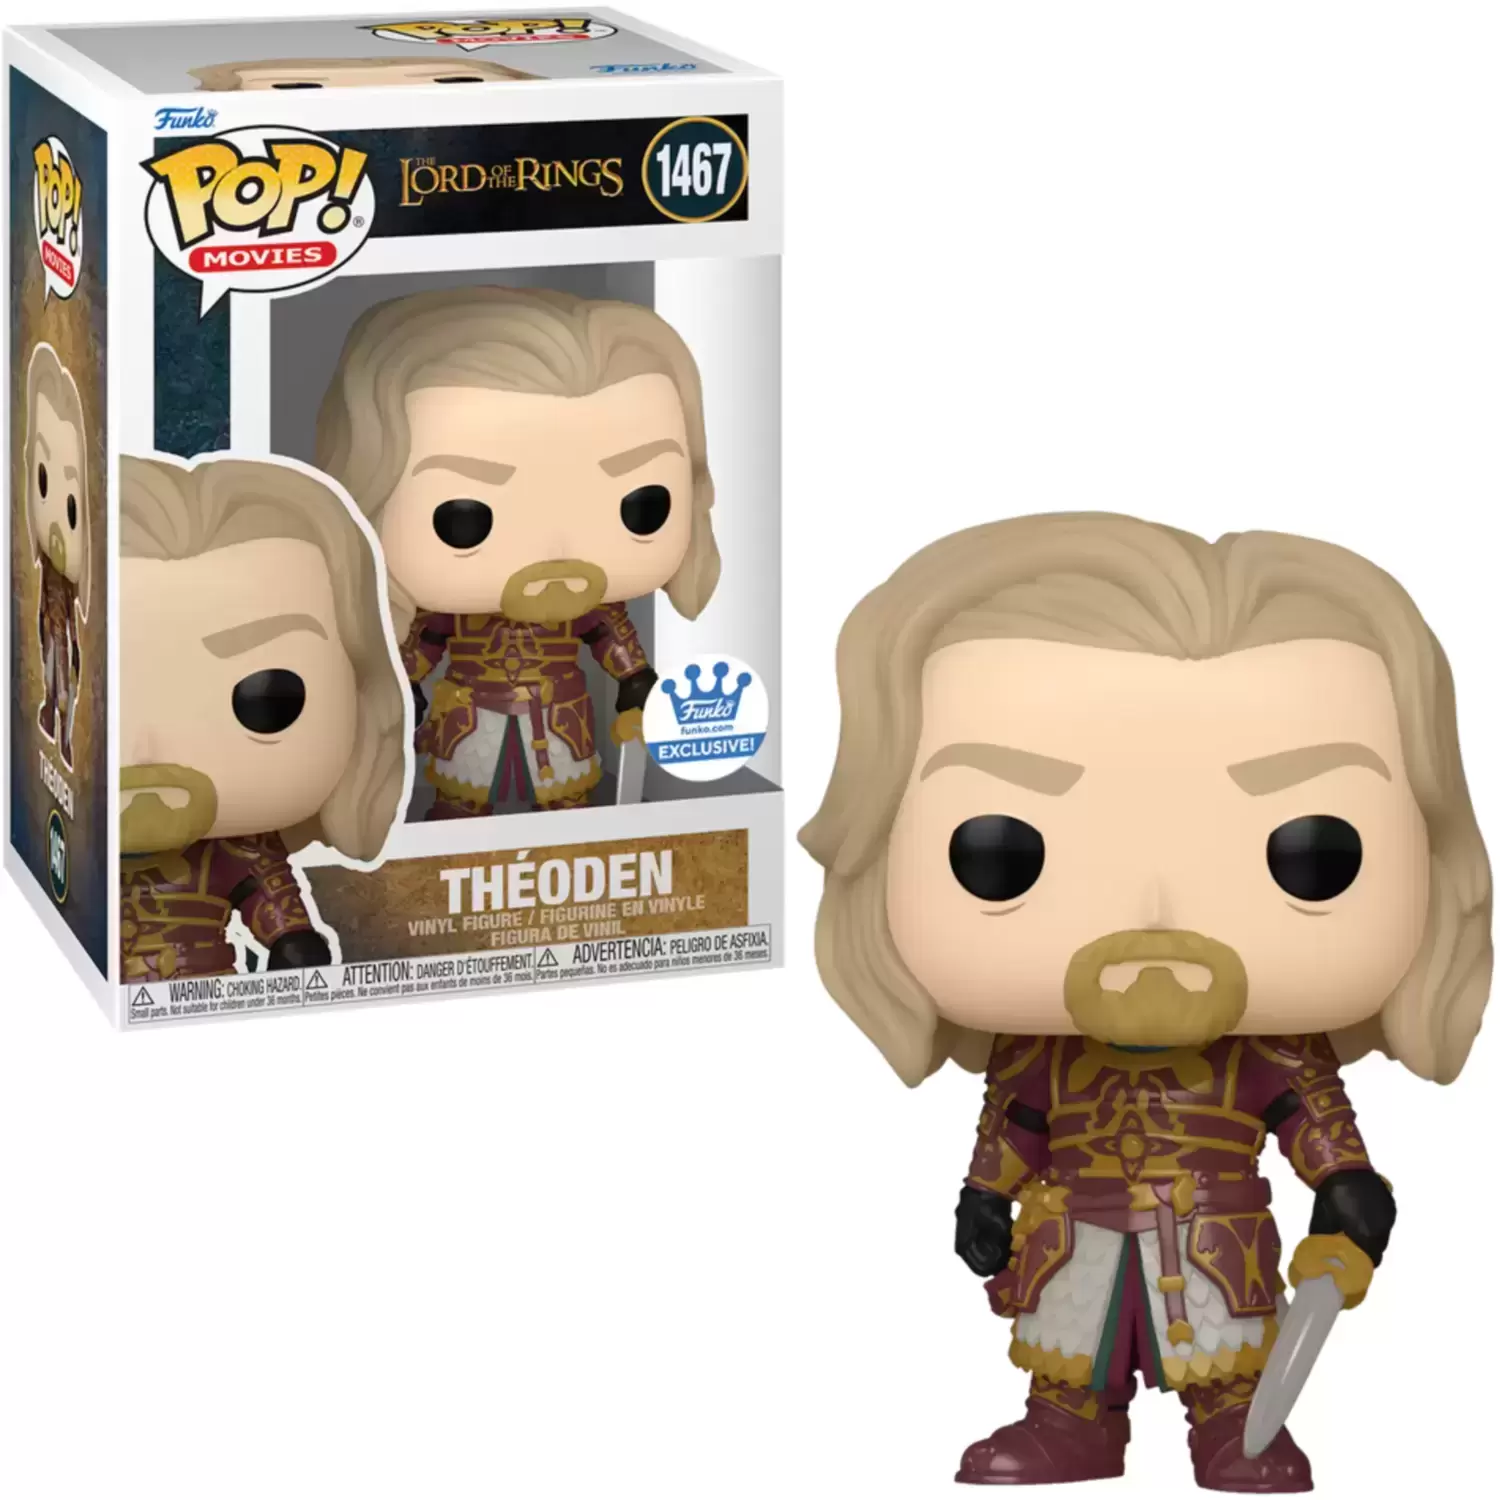 POP! Movies - The Lord Of The Rings - Théoden